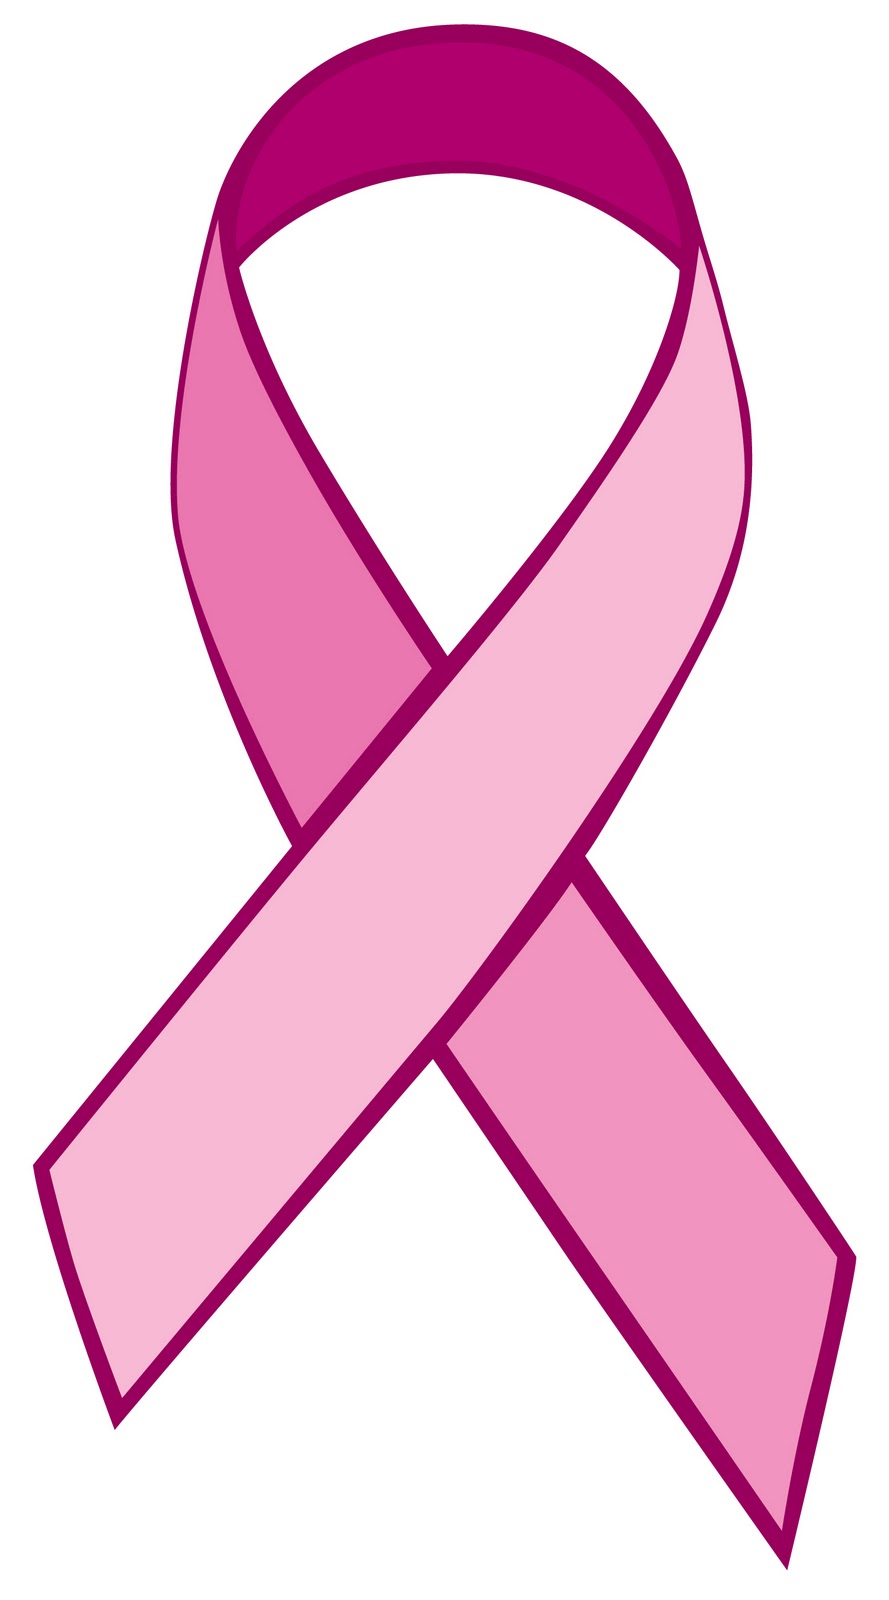 Breast Cancer Ribbon Clipart  - Cancer Ribbon Clipart